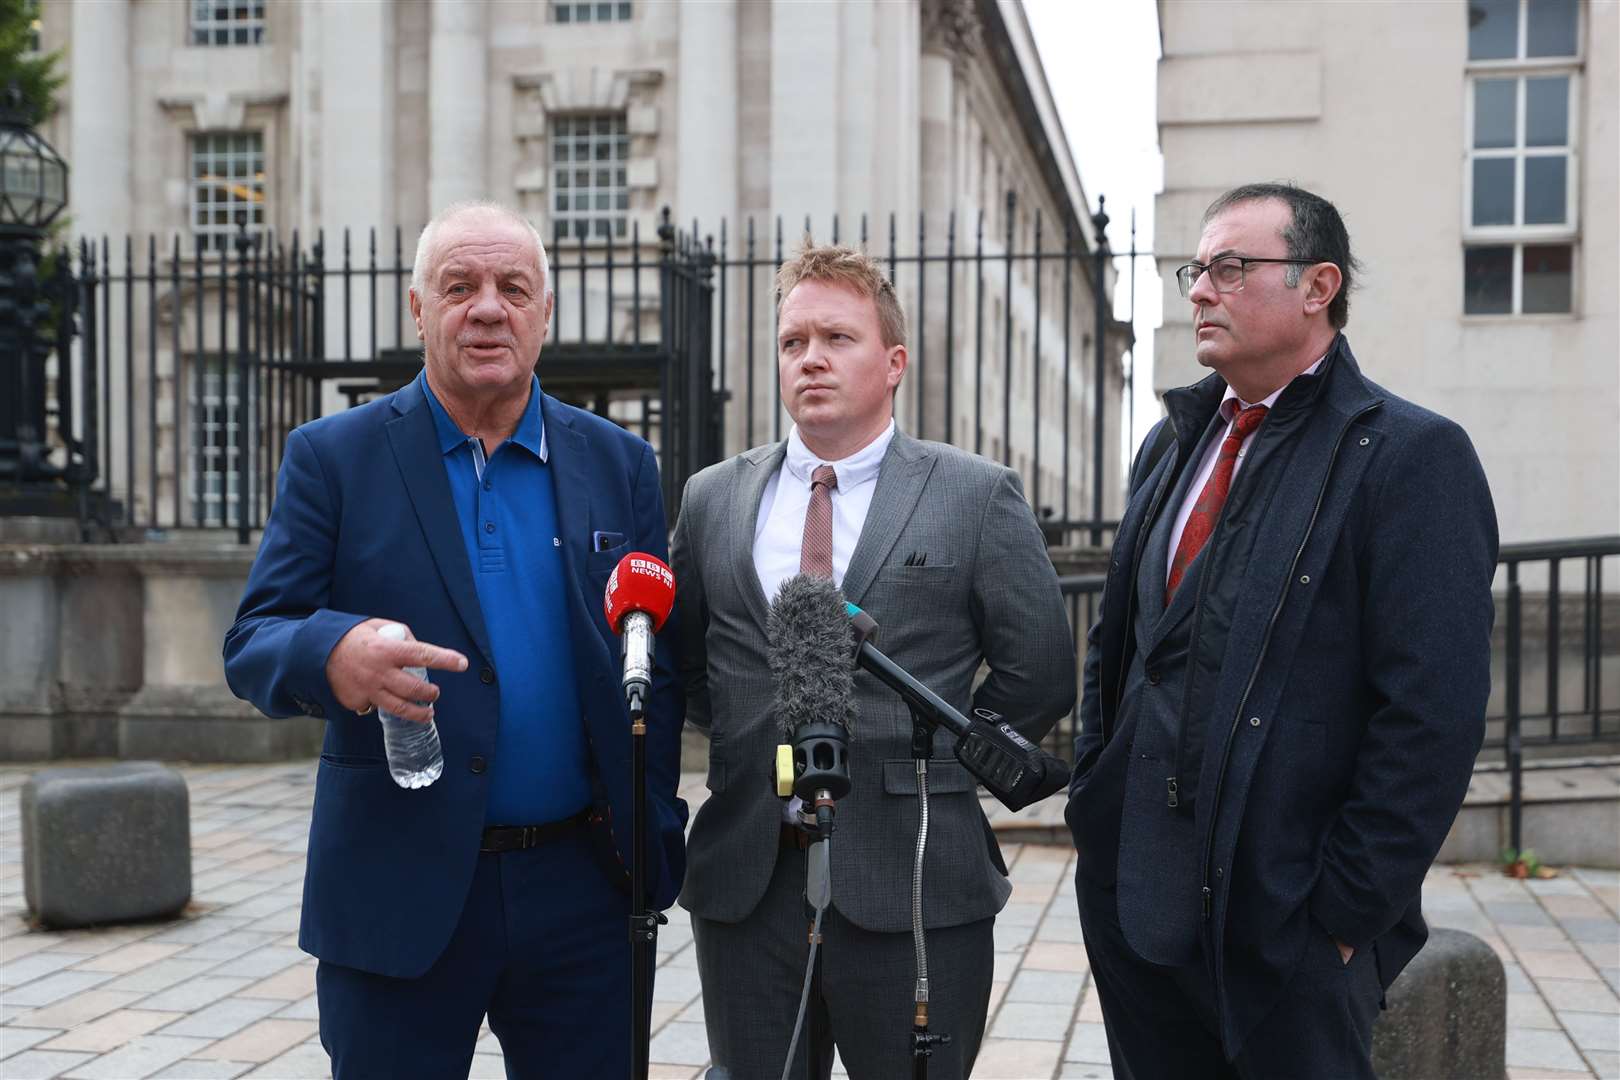 Campaigner Raymond McCord, left, speaks to the media outside the Royal Courts of Justice (Liam McBurney/PA)